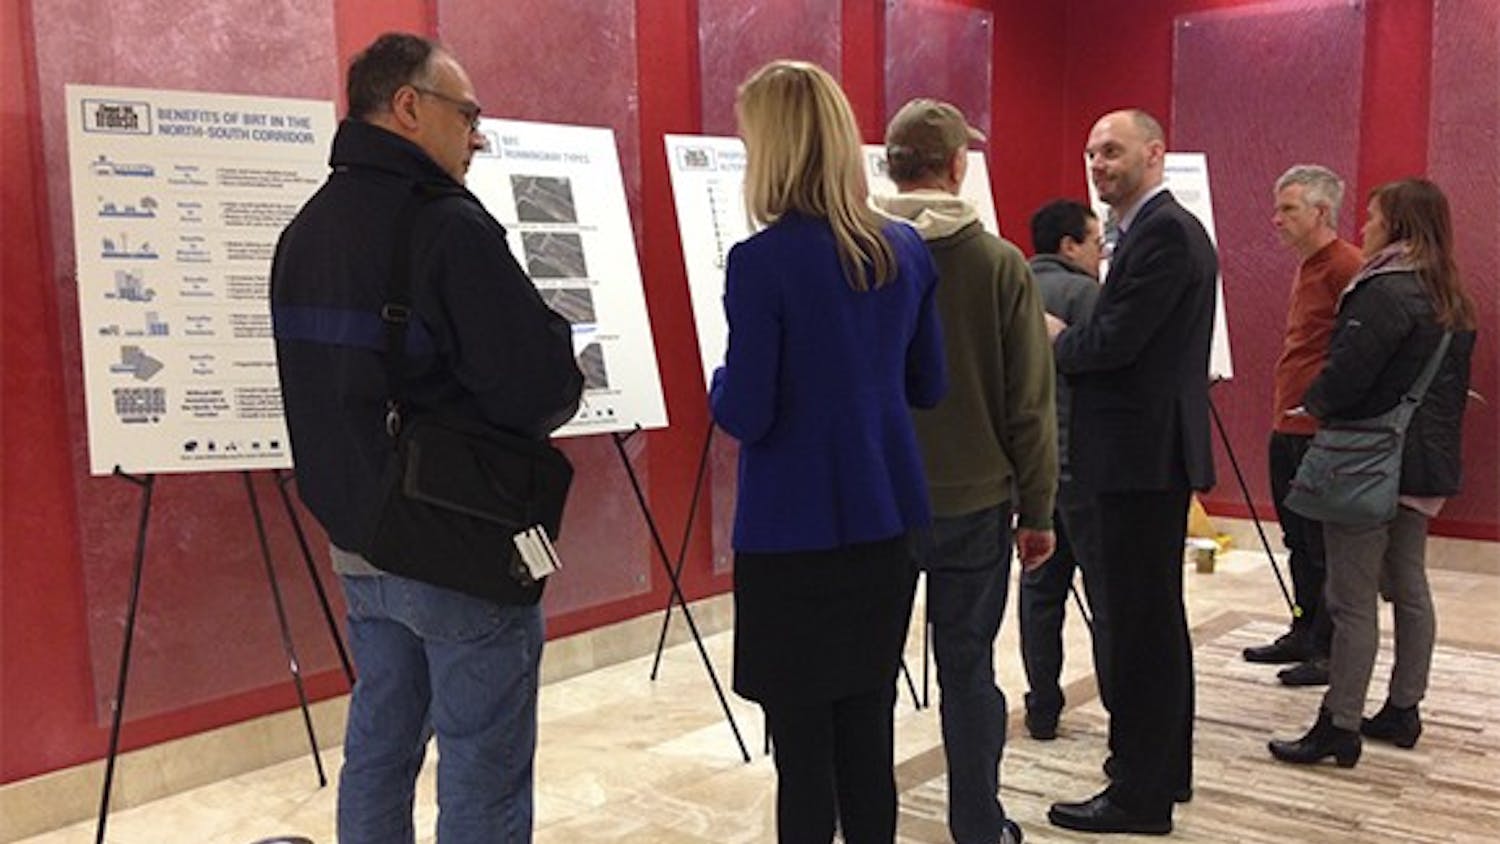 Chapel Hill Transit hosted meetings to discuss a route to connect the Eubanks Road Park and Southern Village shopping center.